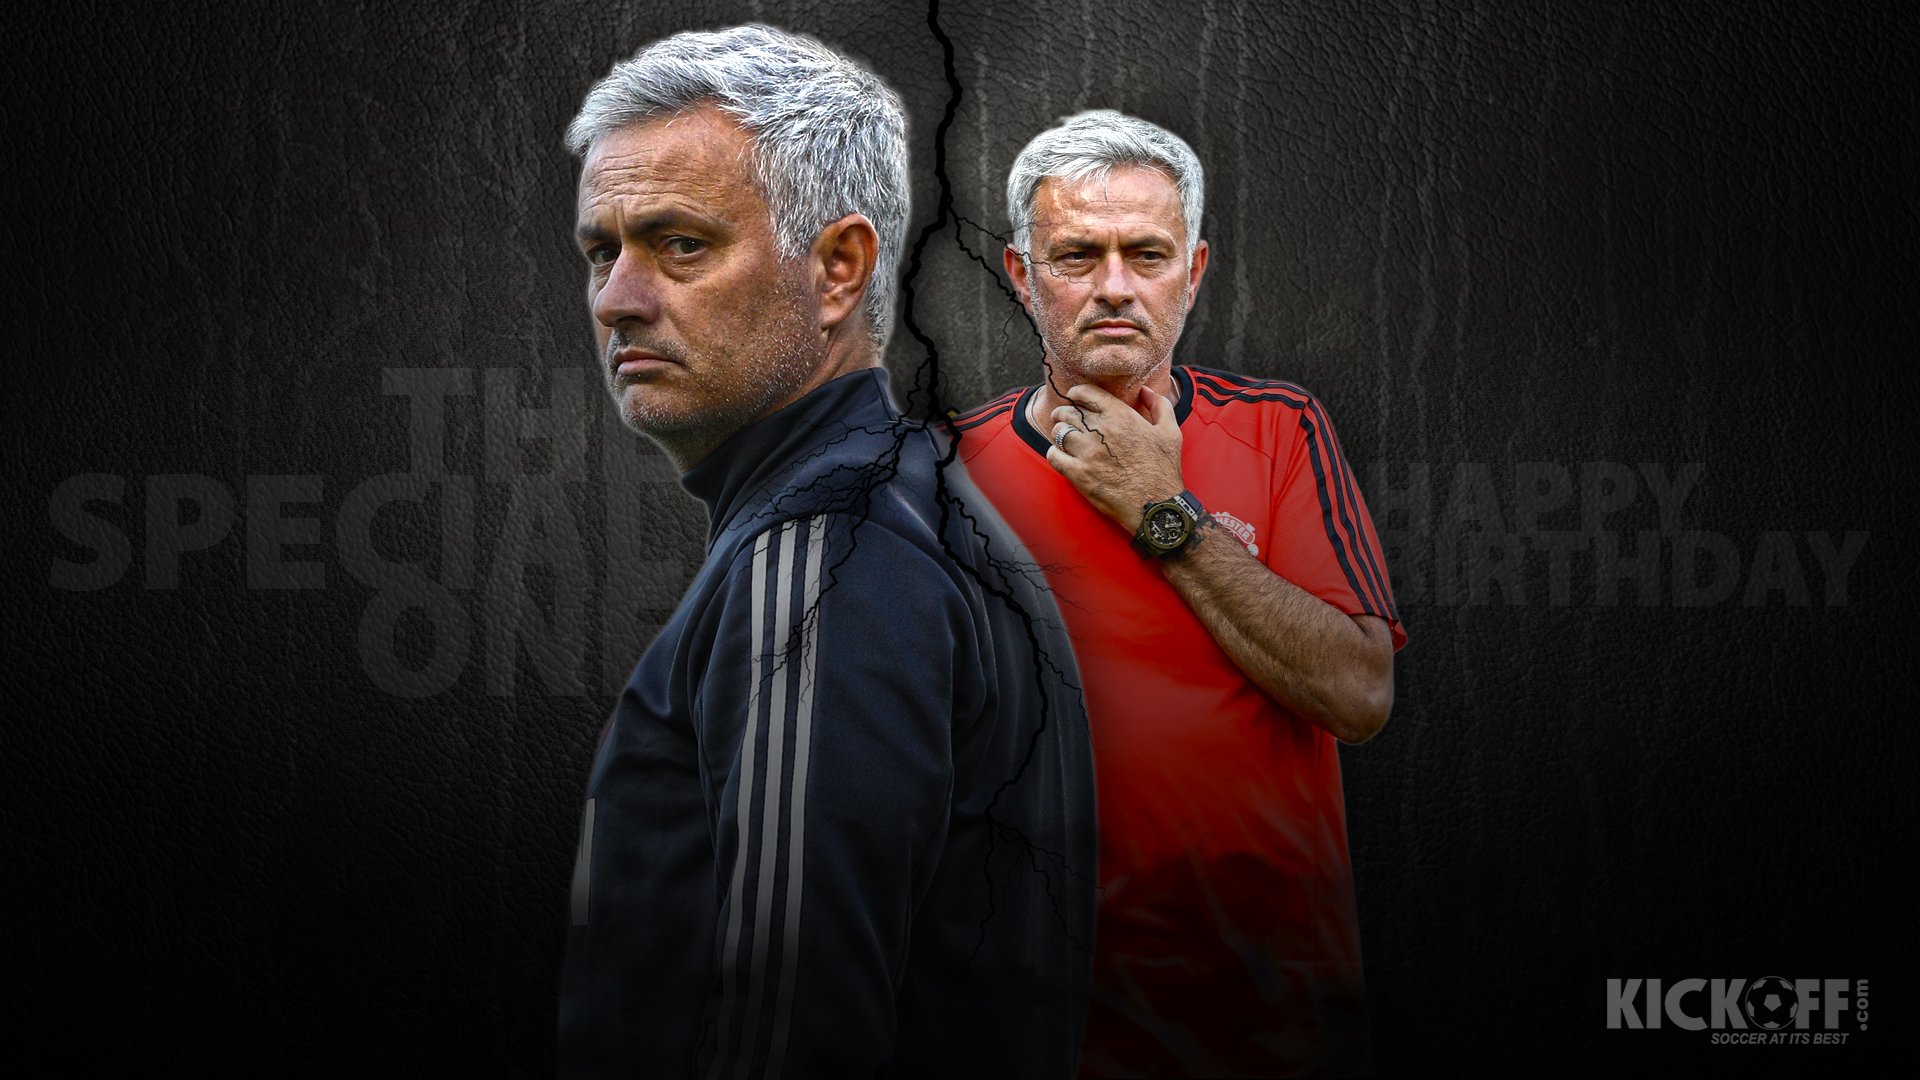 The \Special One\ turns 55 today. Join in wishing Manchester United manager Jose Mourinho a Happy Birthday! 